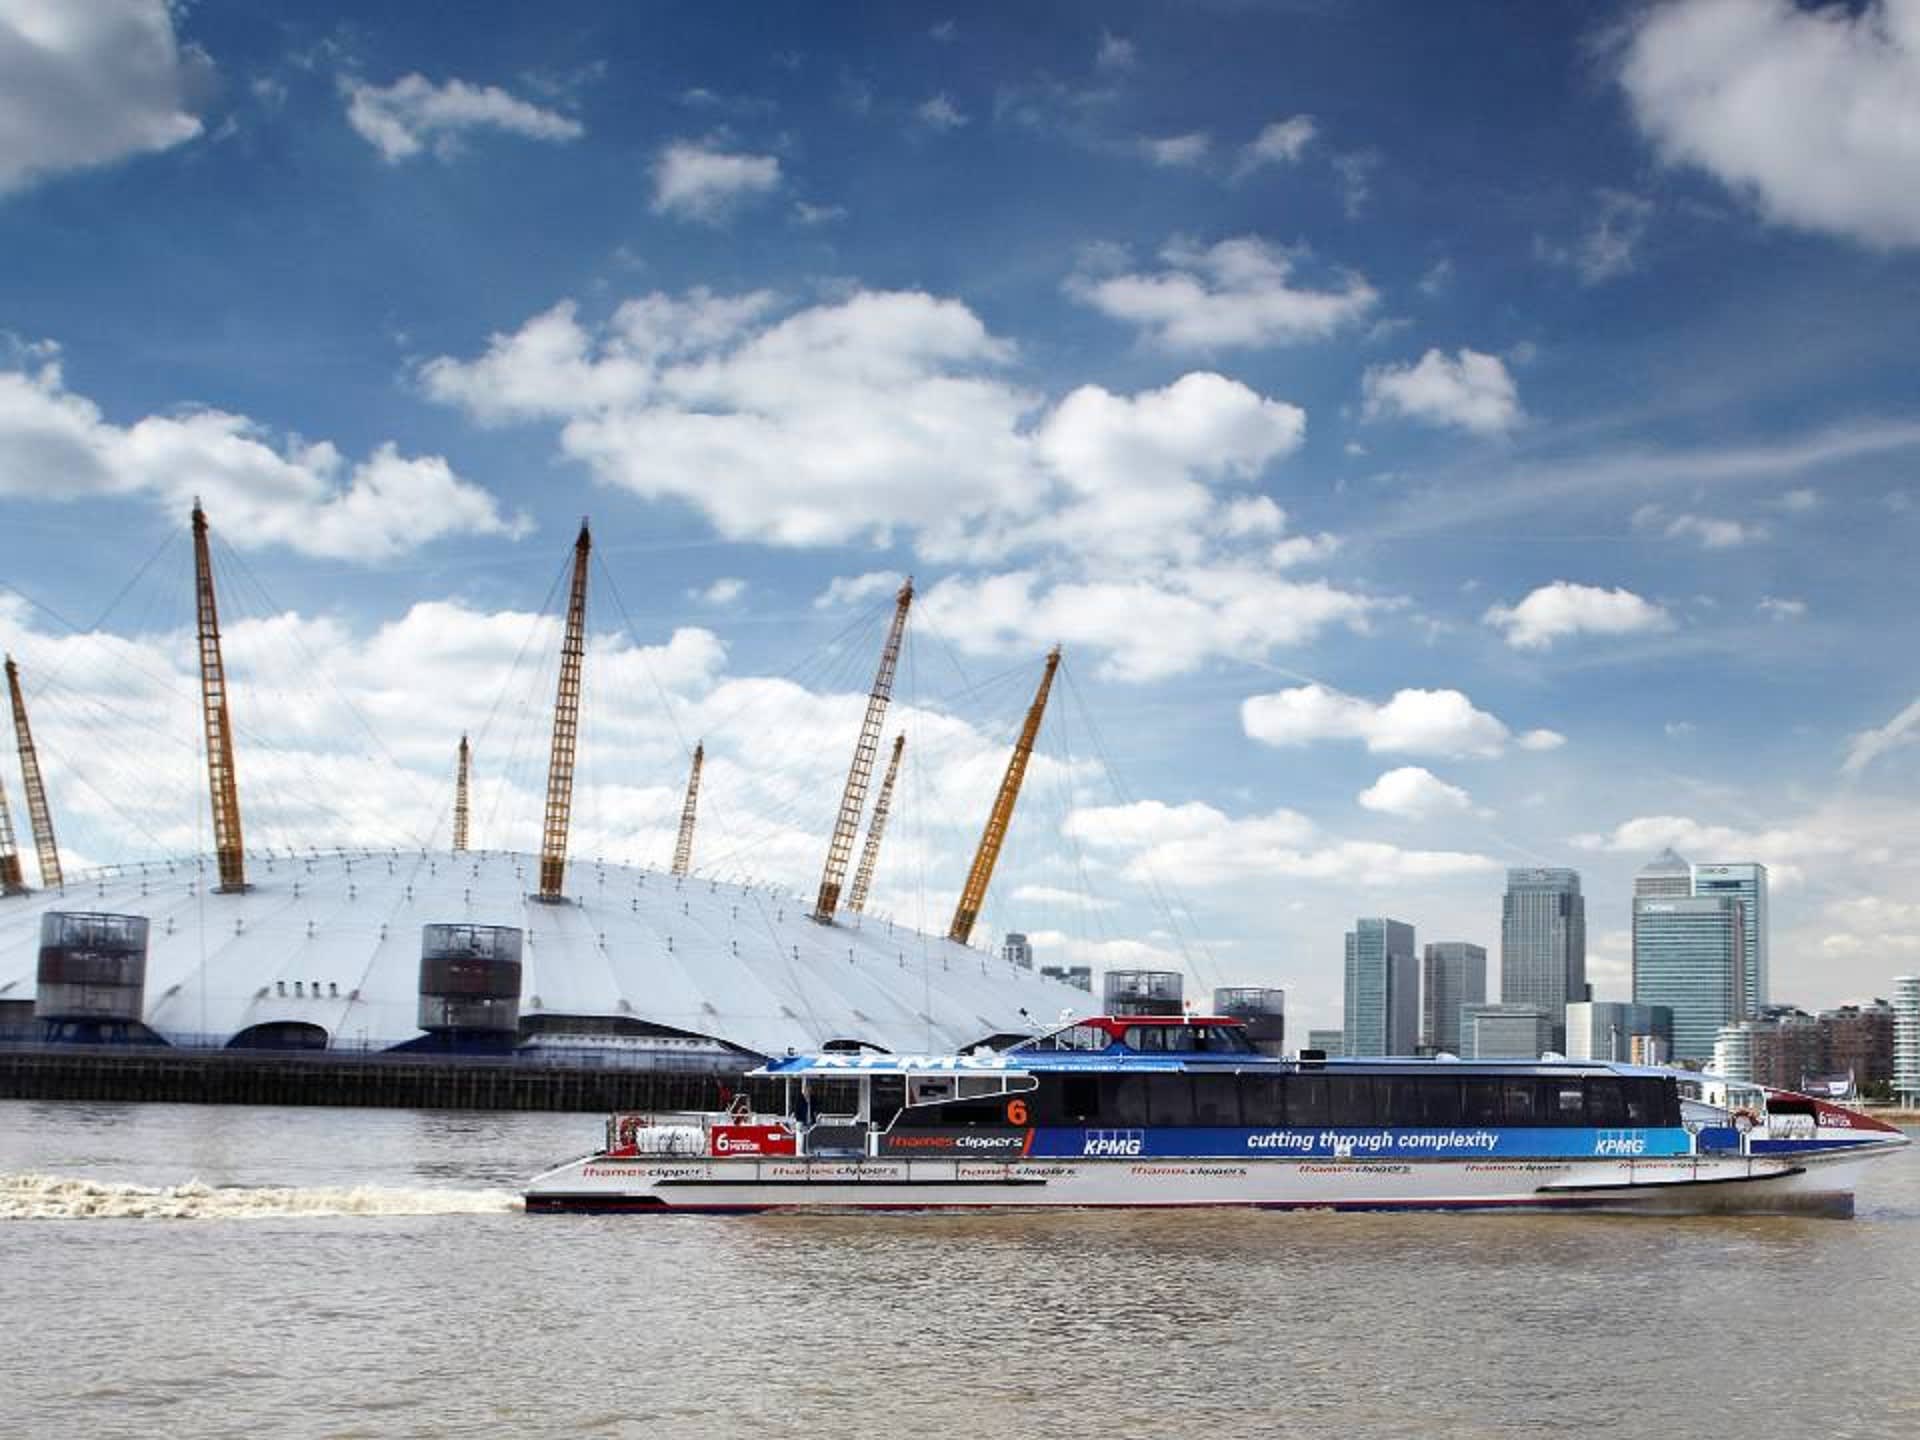 IFS Cloud Cable Car and Thames Clippers